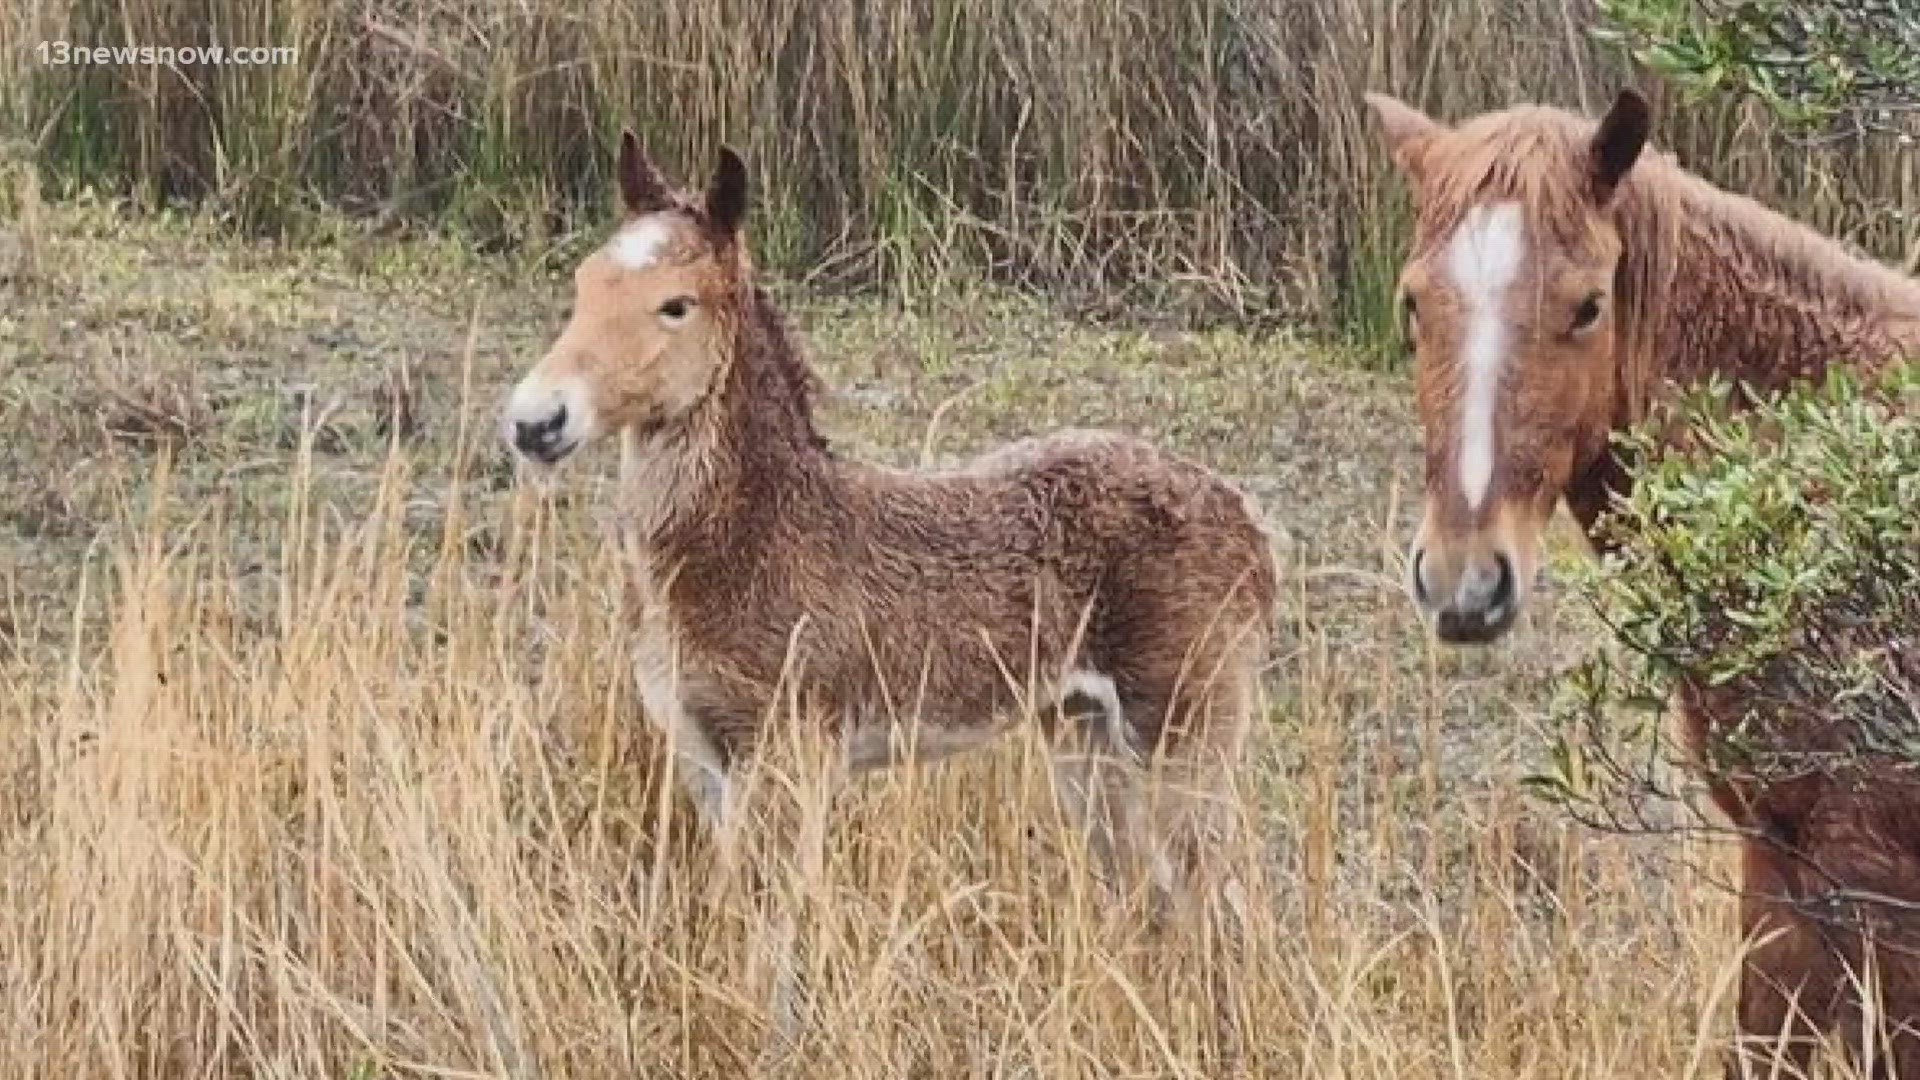 The Corolla Wild Horse Fund took to Facebook to celebrate the new filly, but at the same time, reminded people not to approach the wild horses.